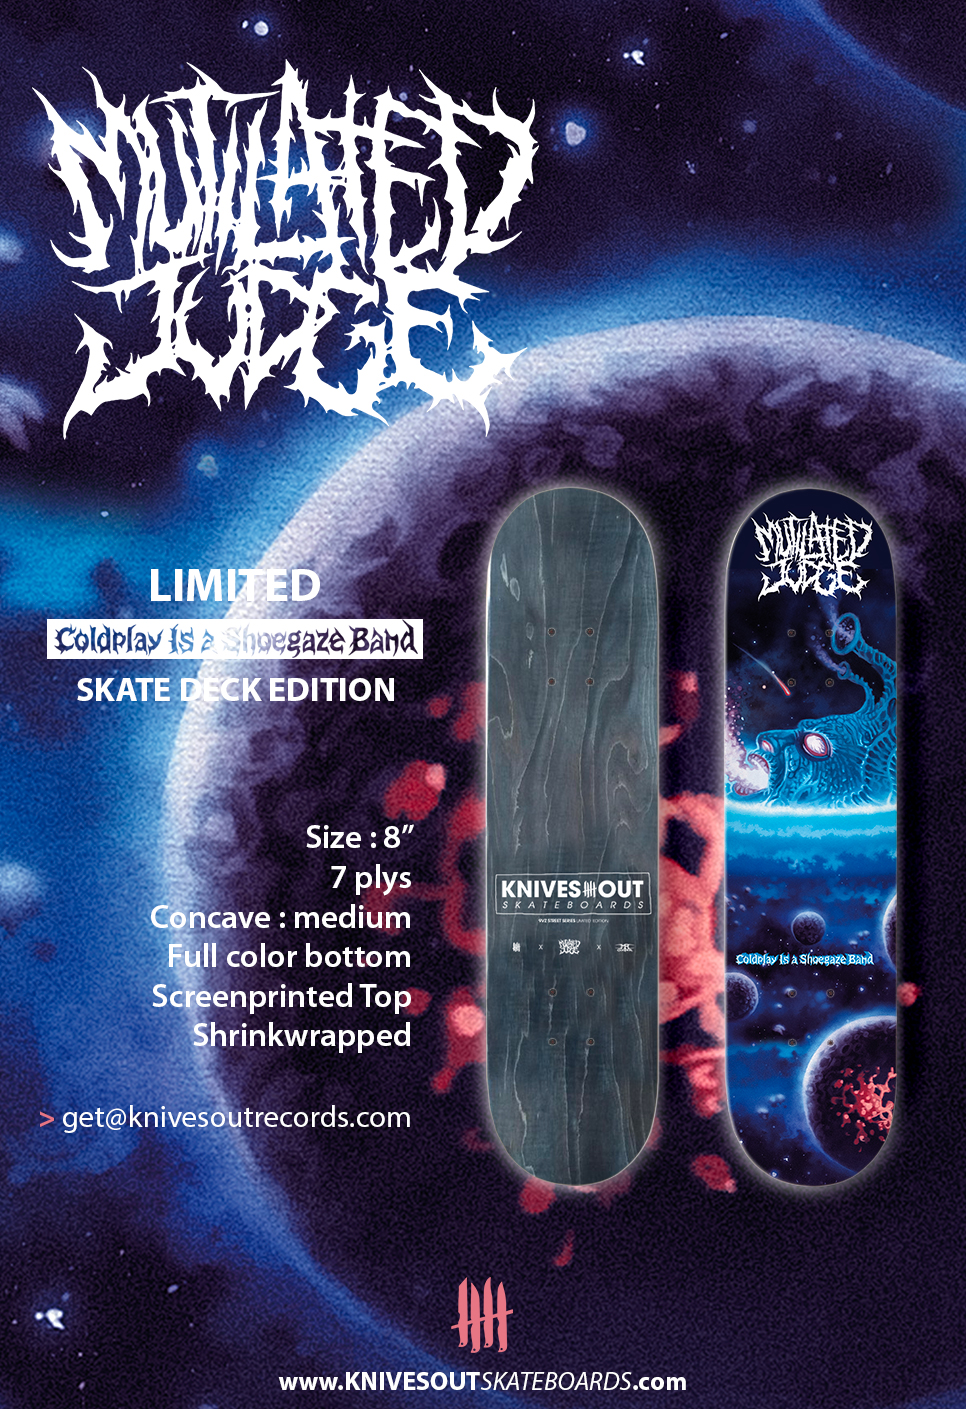 MUTILATED JUDGE Coldplay is a Shoegaze Band limited skate deck edition